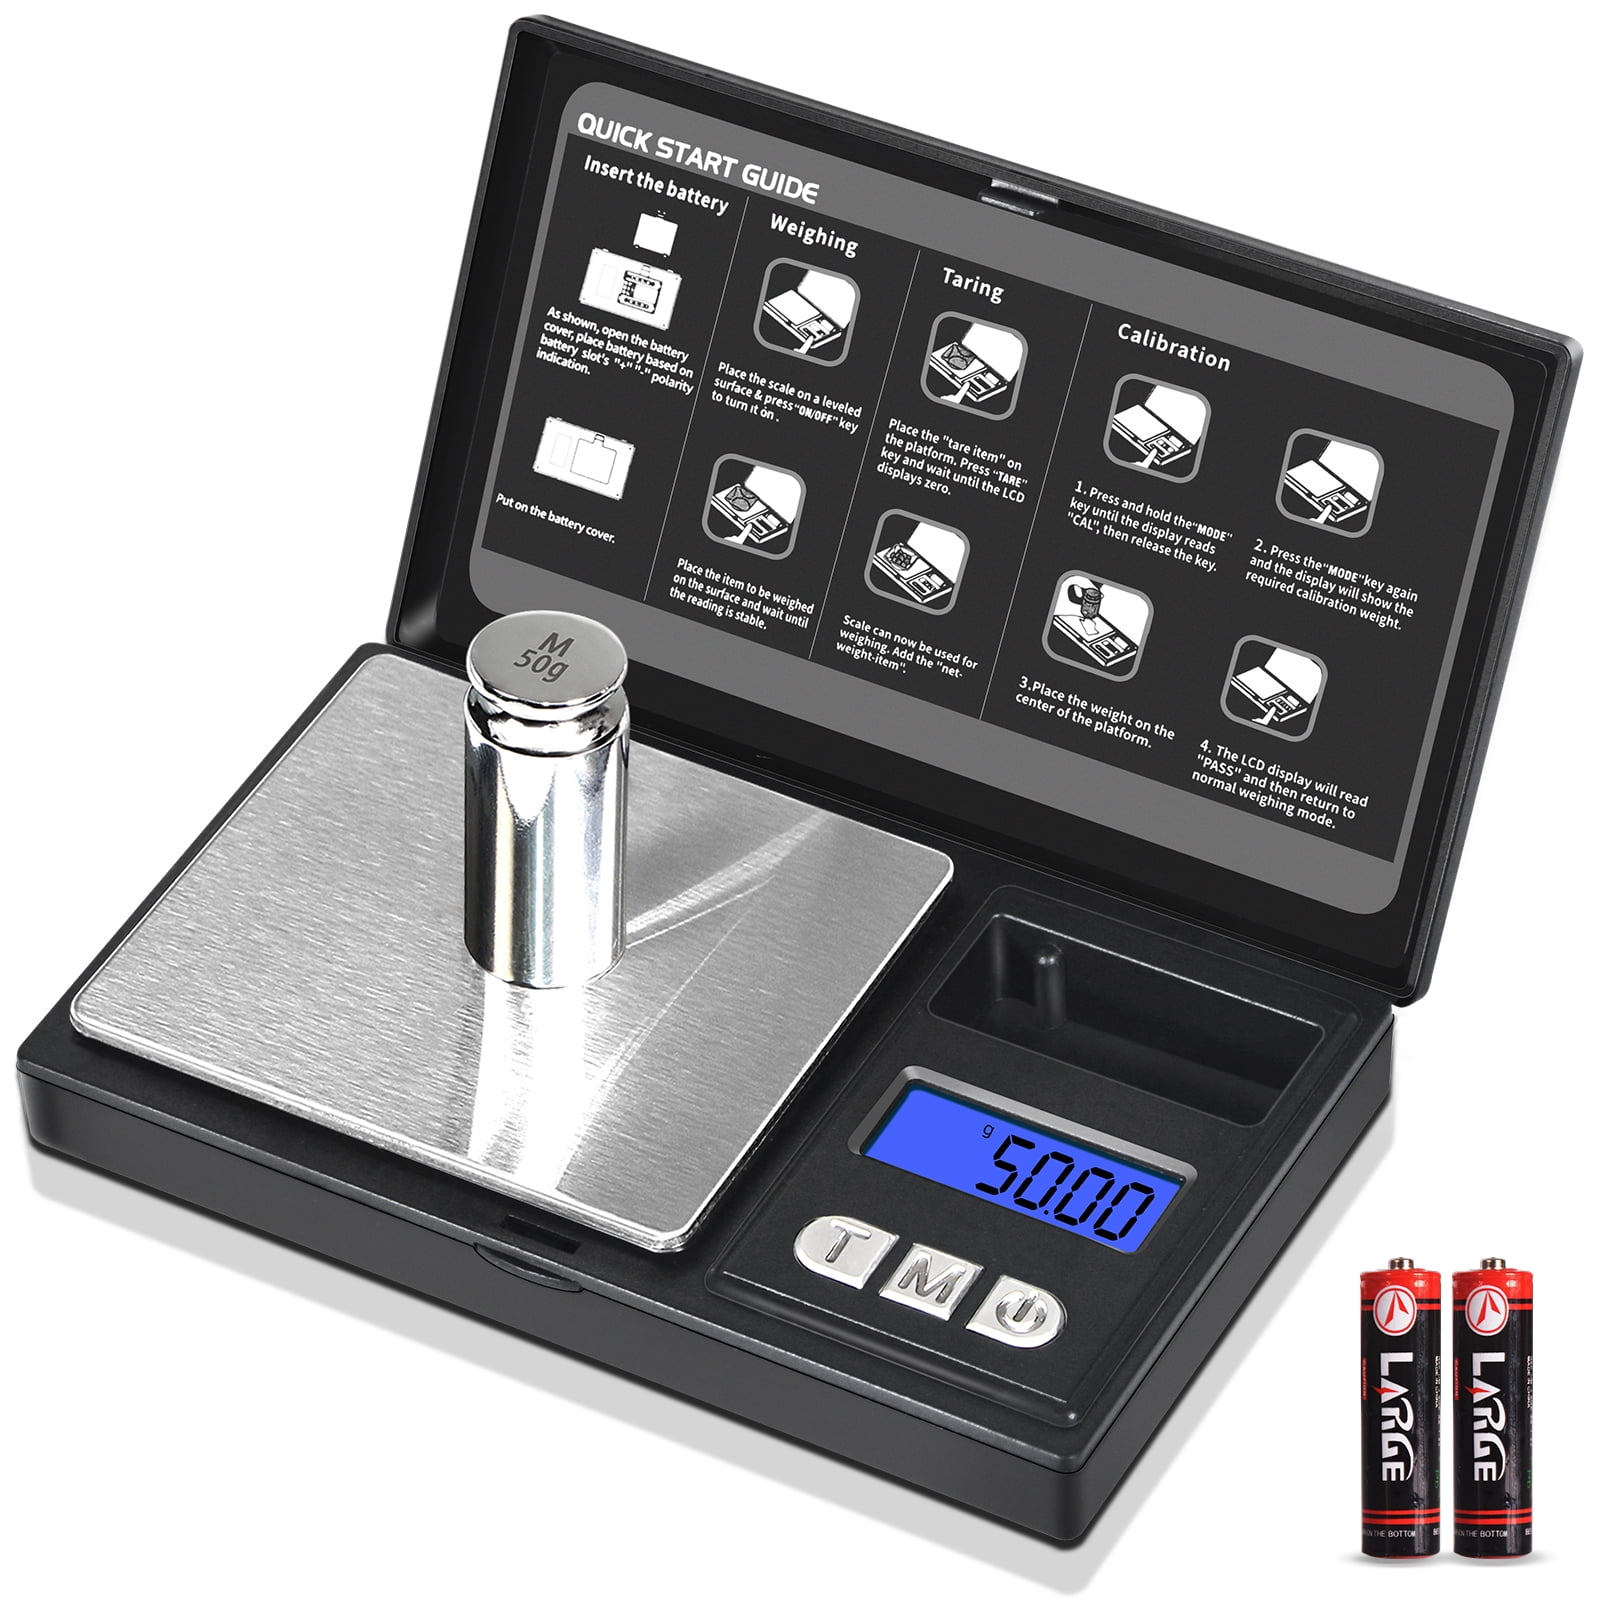 Digital Pocket Scale, Gold Scales, Small Scale, Gram Scale